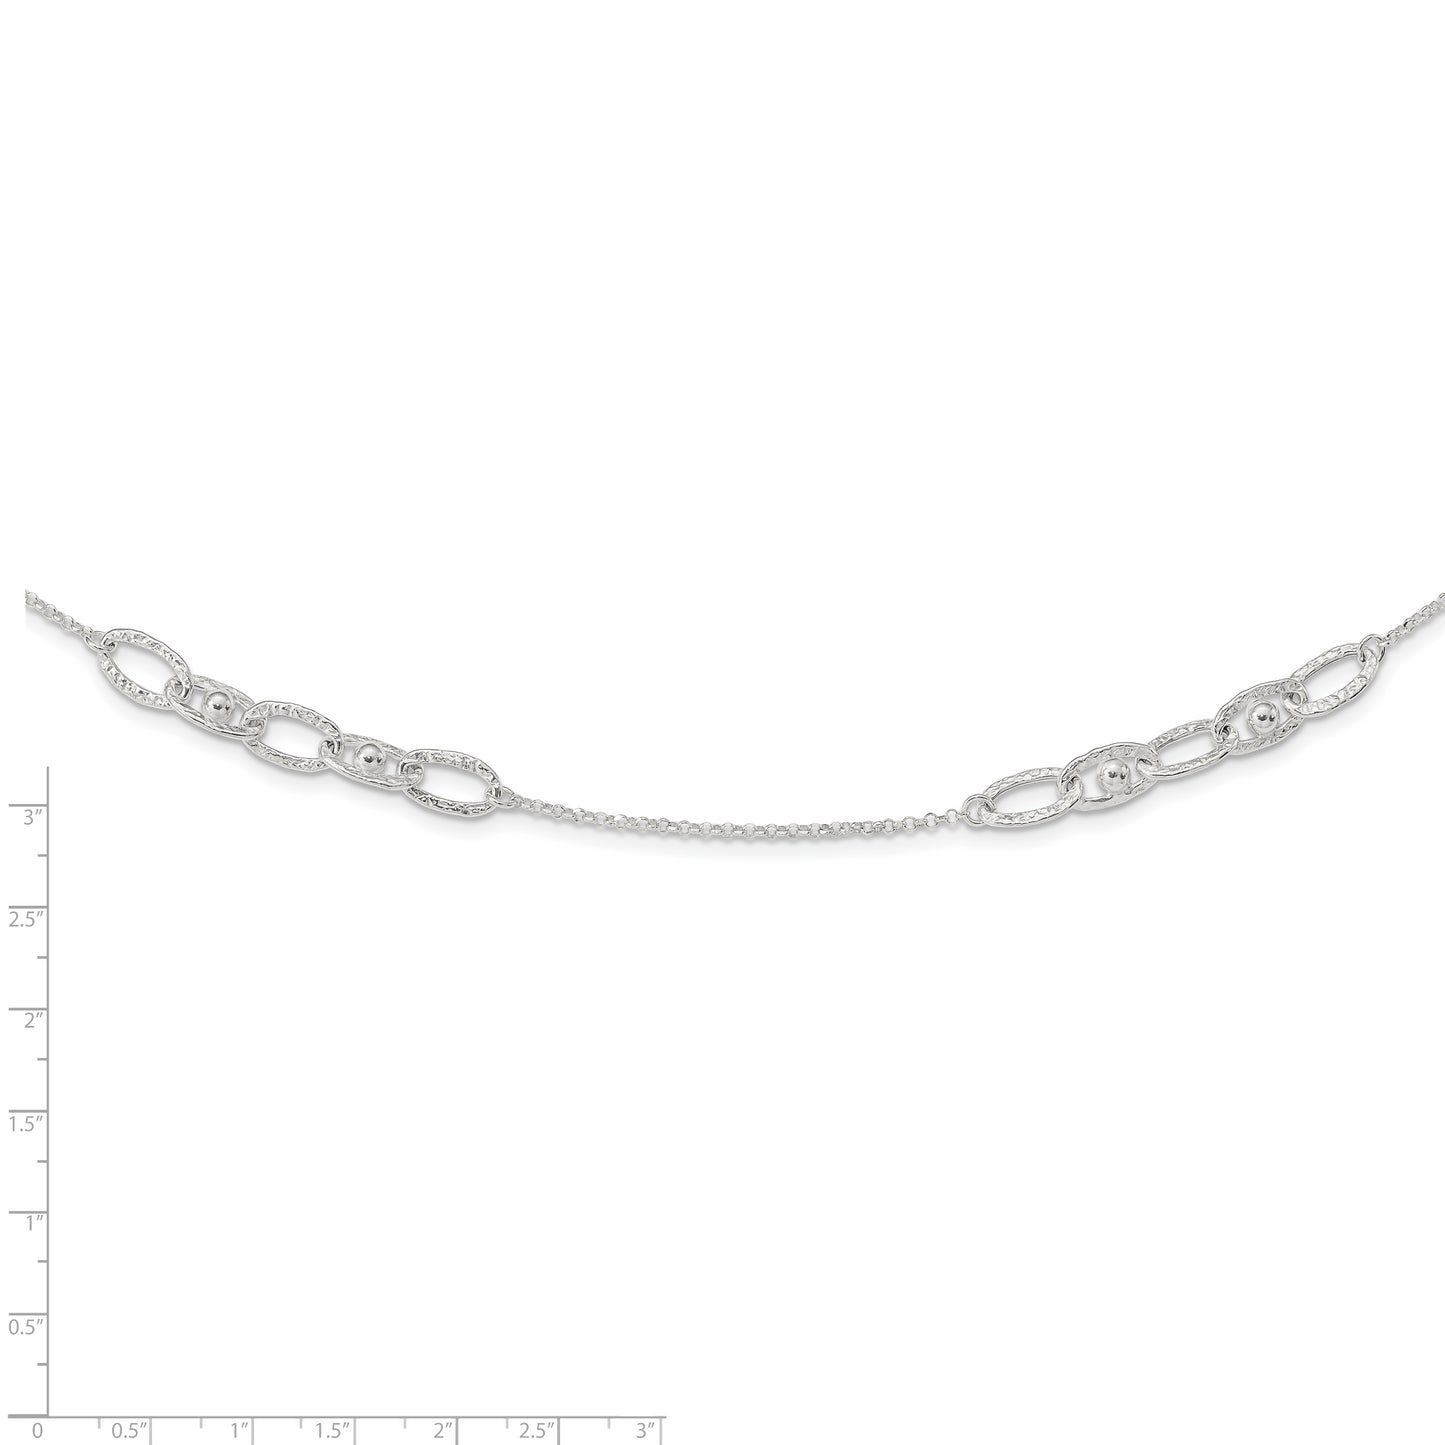 Sterling Silver Hammered Oval with Beads Necklace